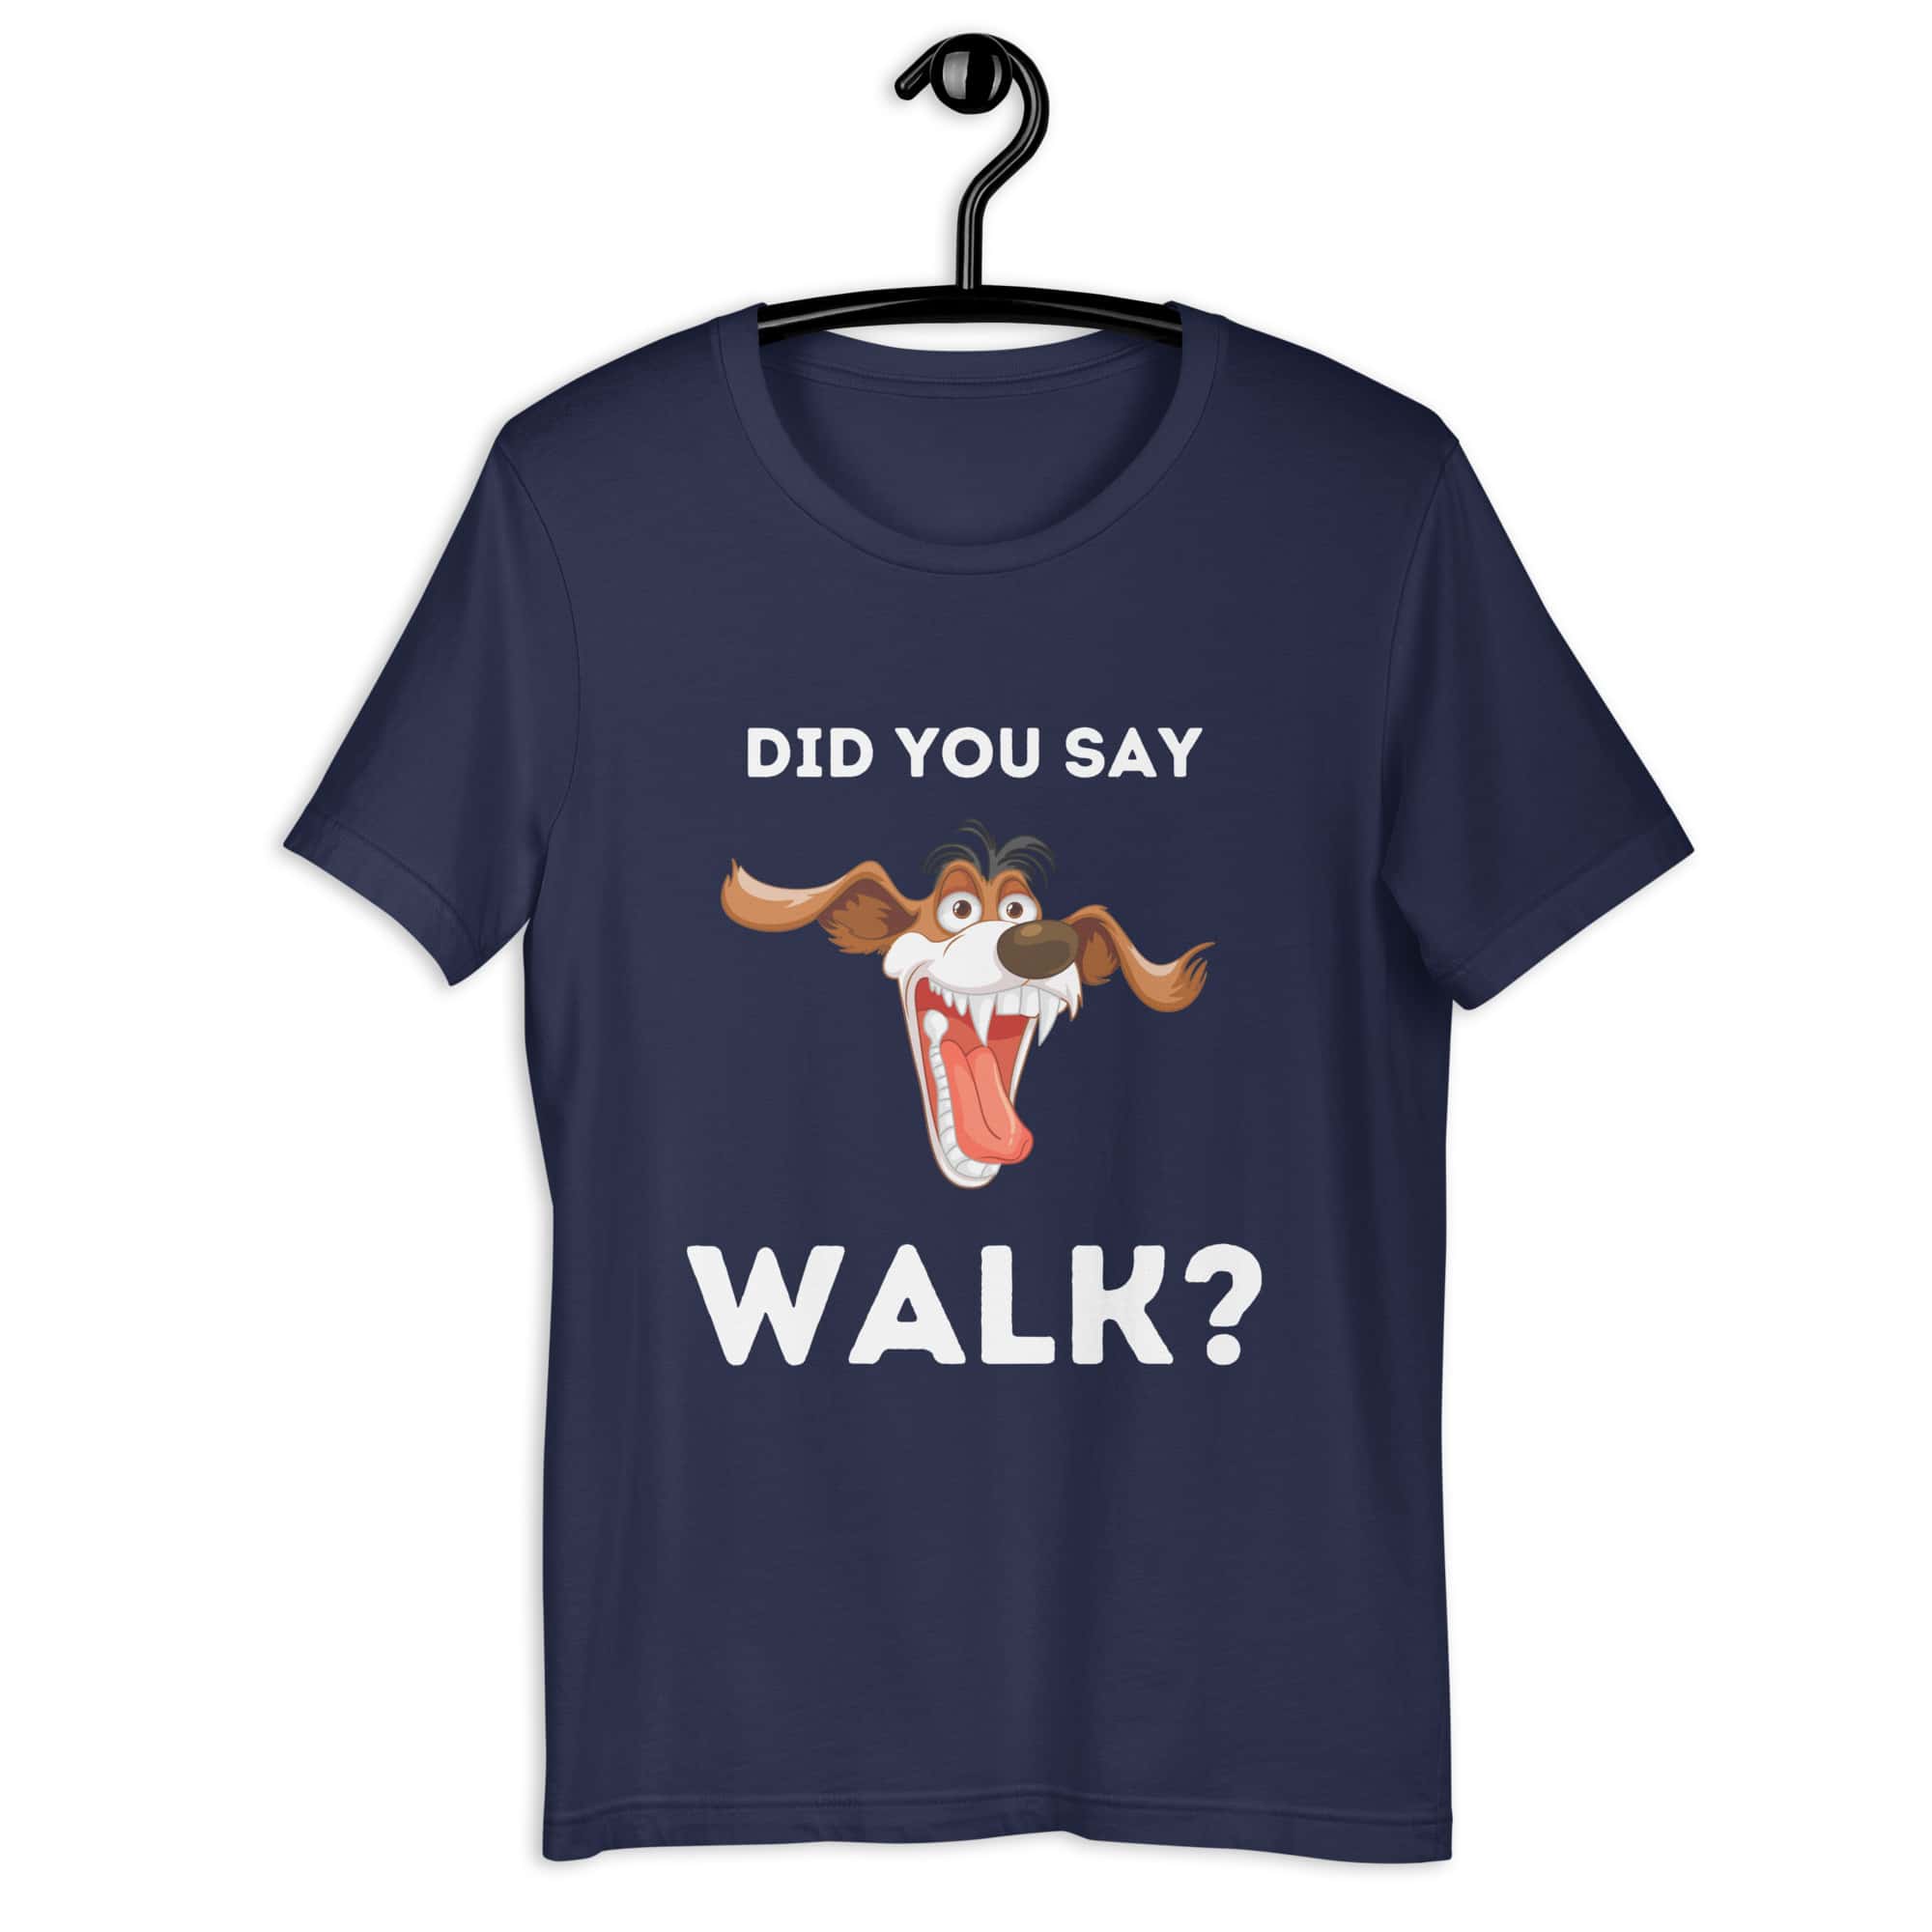 The "Funny 'Did You Say Walk?' Dog Unisex T-Shirt" captures the excitement dogs feel at the mention of a walk. Made from a comfortable, durable blend, it features a vibrant graphic that dog lovers will relate to. Available in various sizes and colors, it's perfect for casual wear, highlighting a universal moment in dog ownership with humor and style. Navy